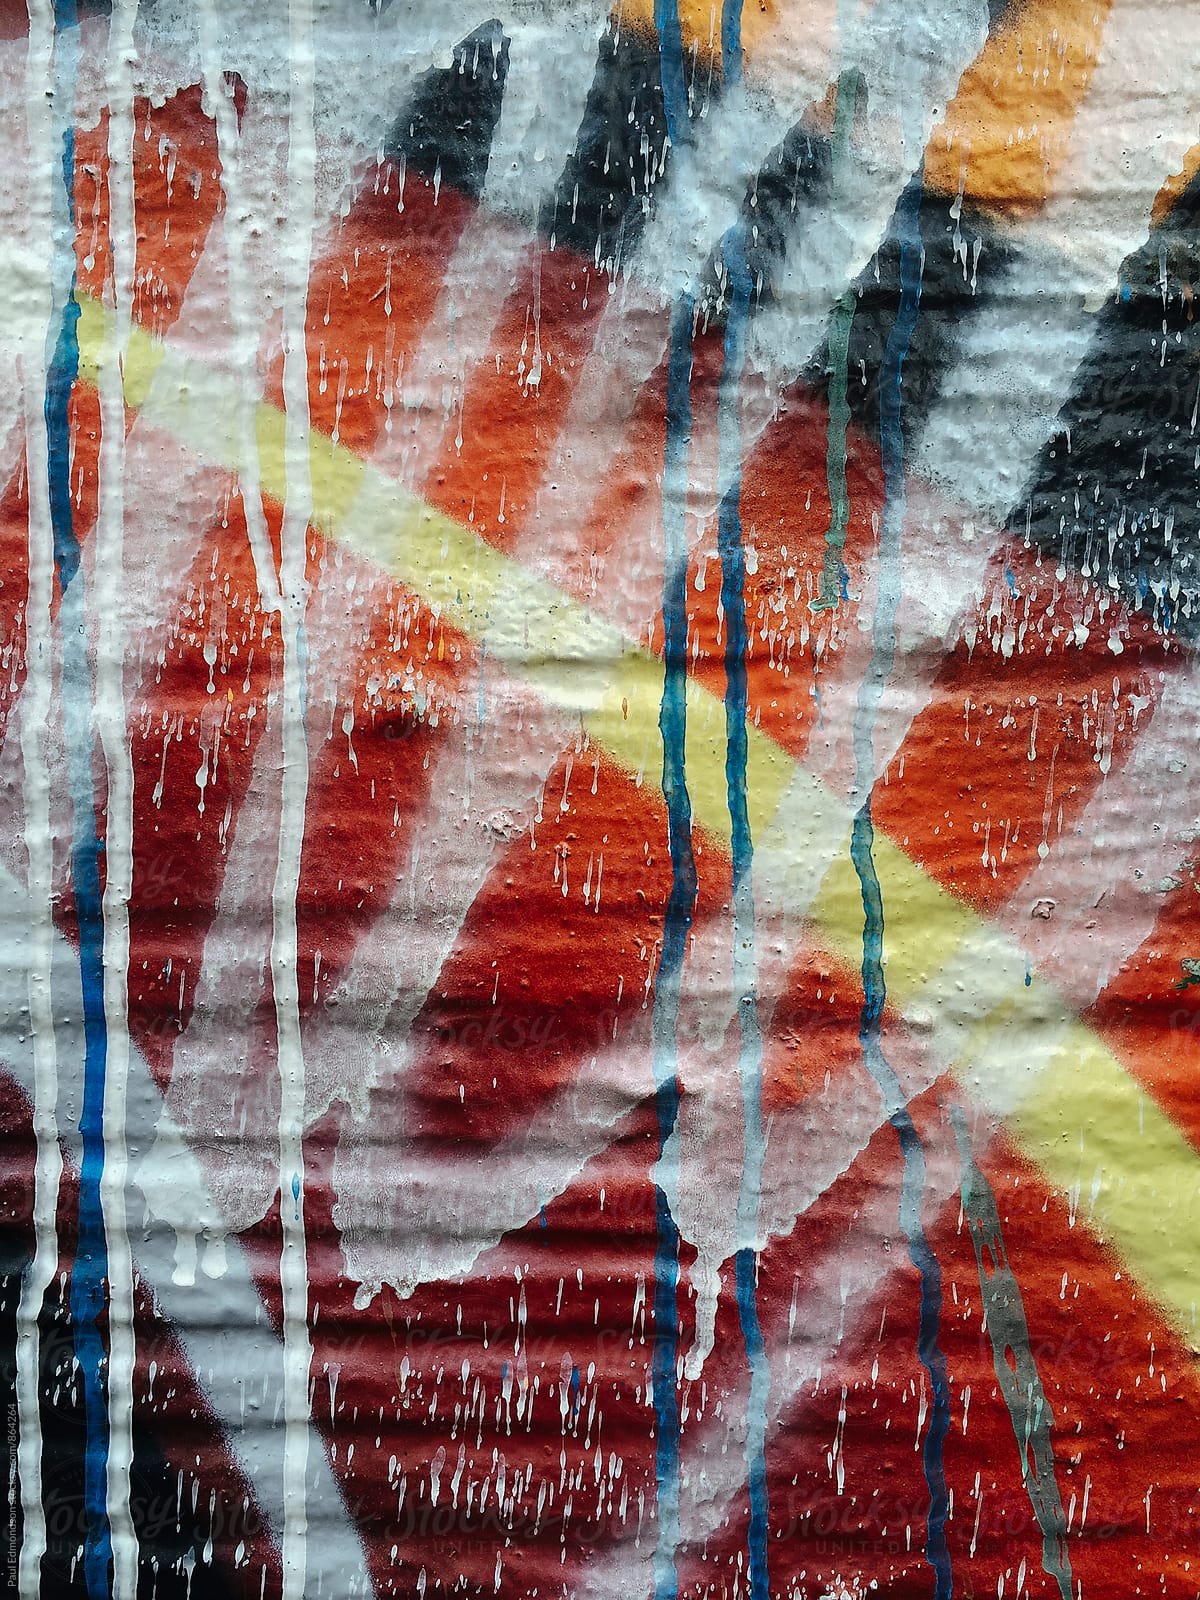 Colorful dripping paint and graffiti on building wall, close up